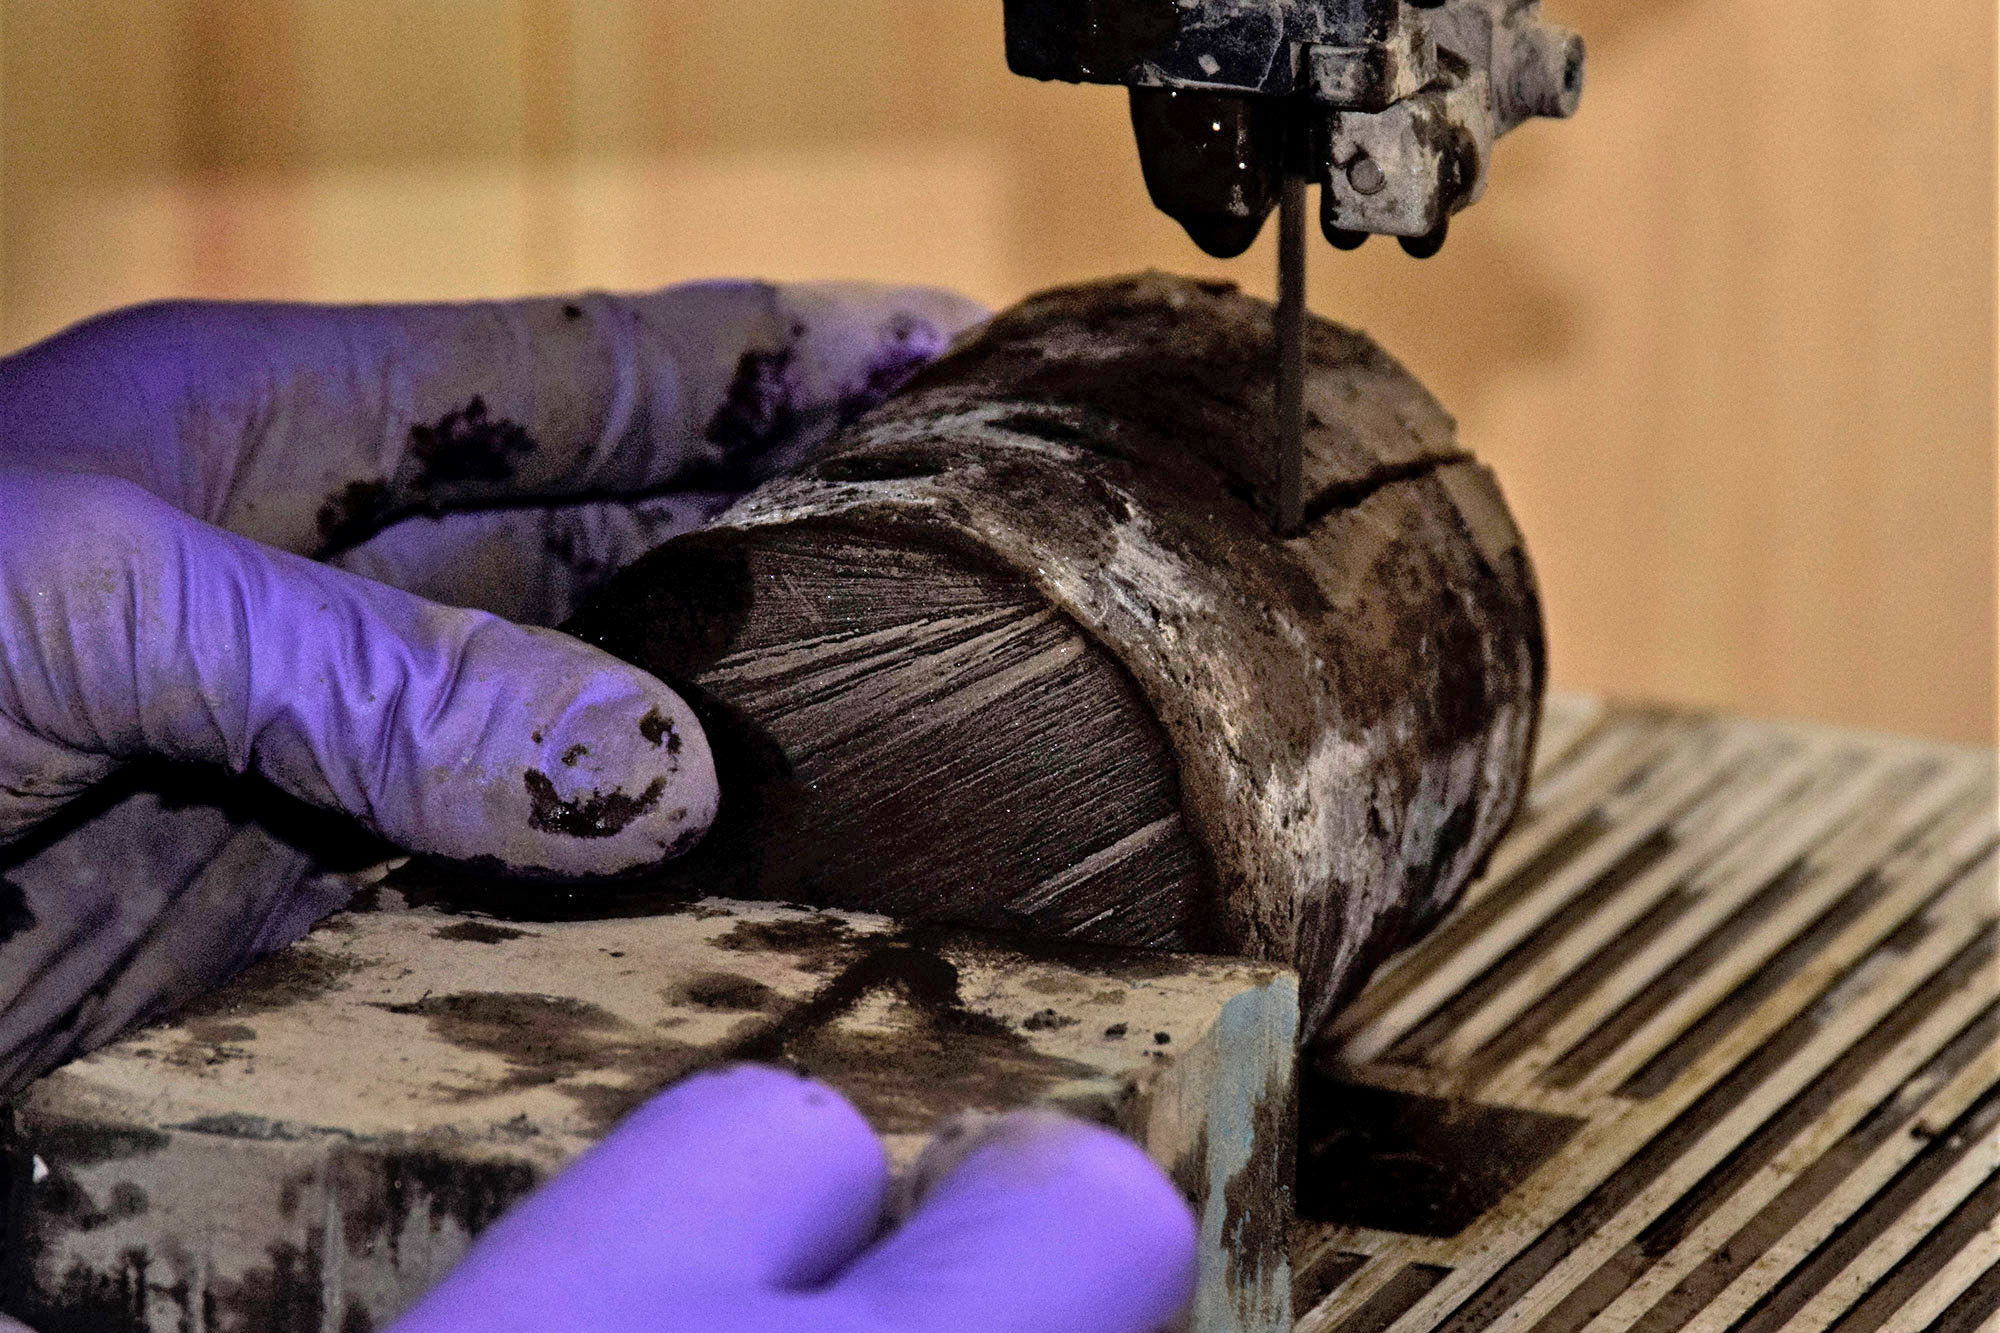 In an undated handout photo, Laura Jardine uses a saw to cut a core sample of permafrost taken from Alaska's vast Yukon Delta National Wildlife Refuge. The rate at which permafrost is thawing here is a vital question for climate scientists. (John Schade via The New York Times)